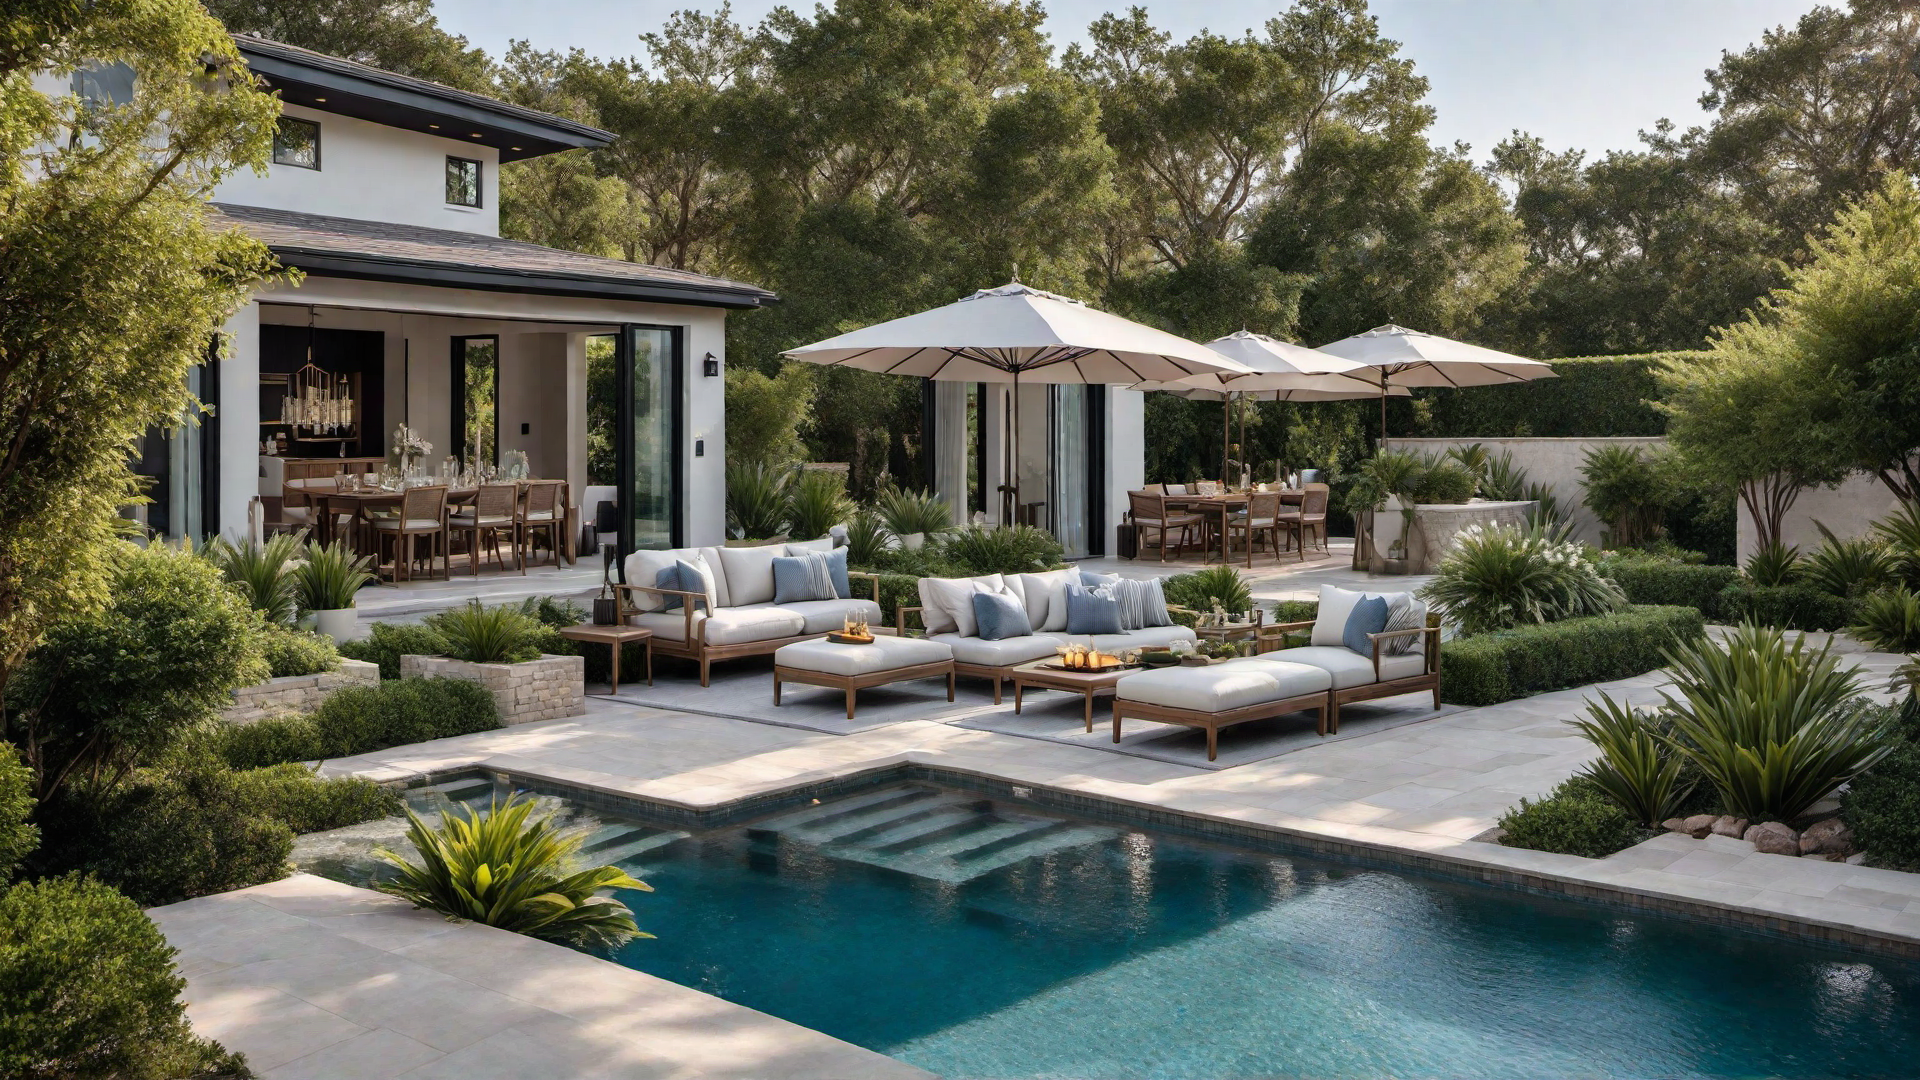 Chic Poolside Cabana with Comfortable Seating